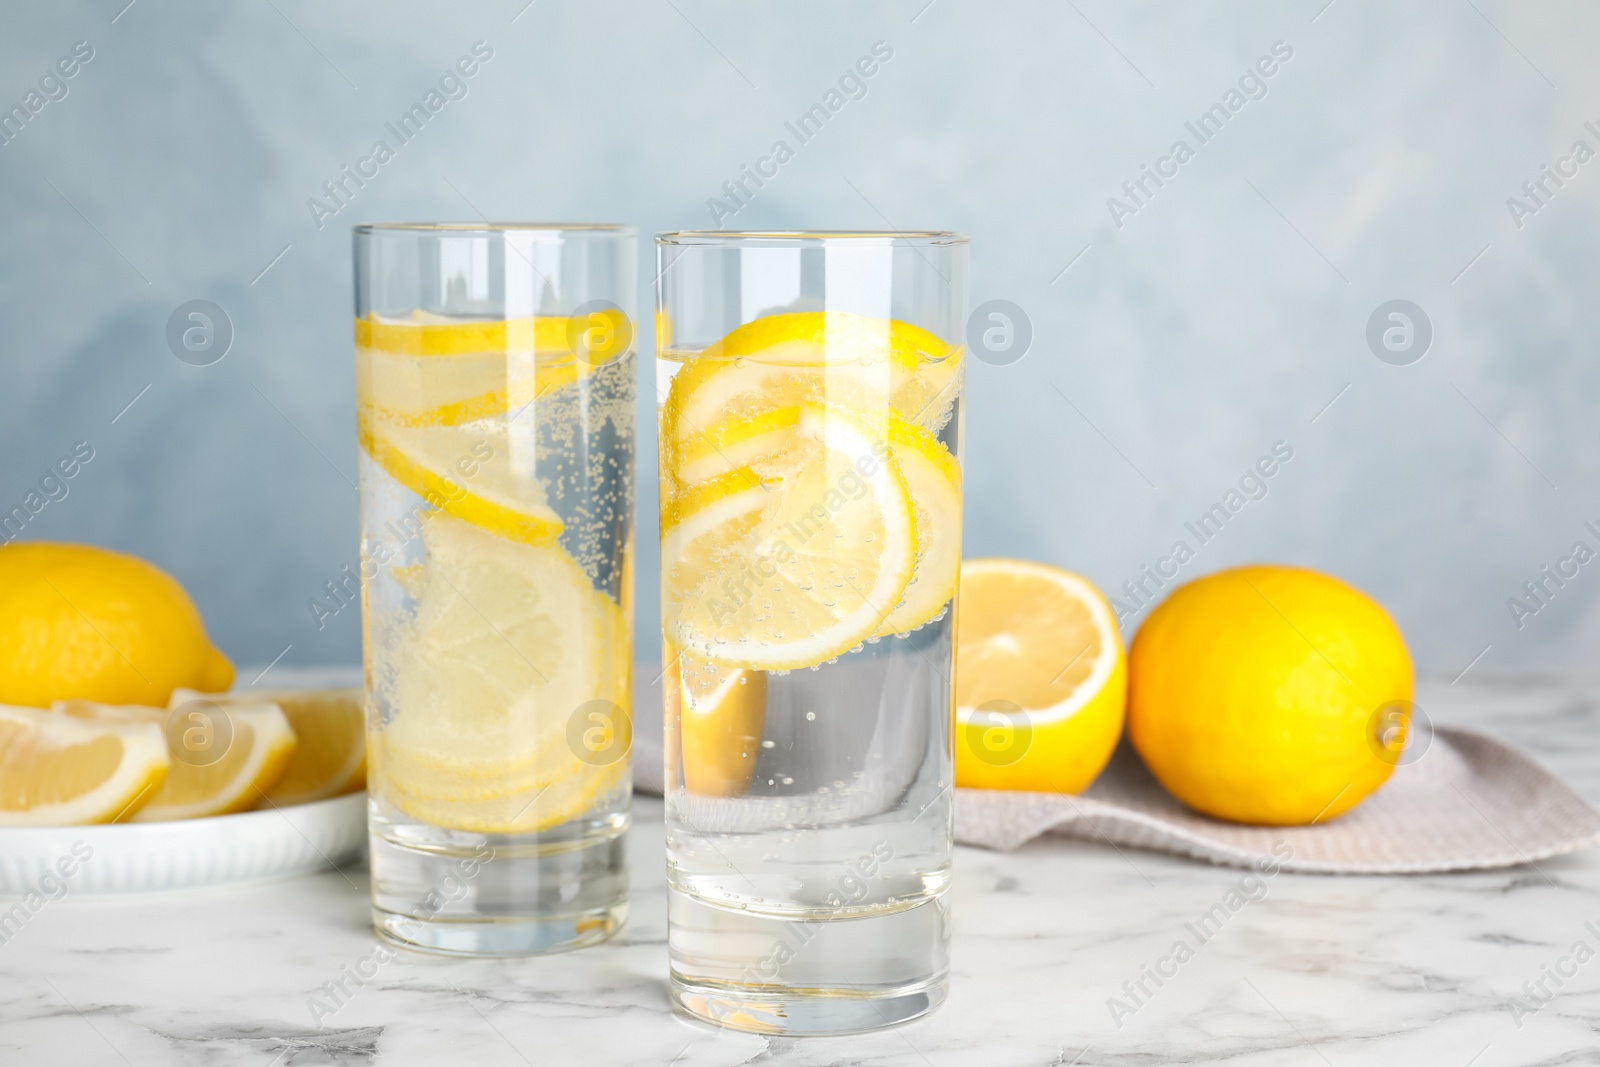 Photo of Soda water with lemon slices on white marble table